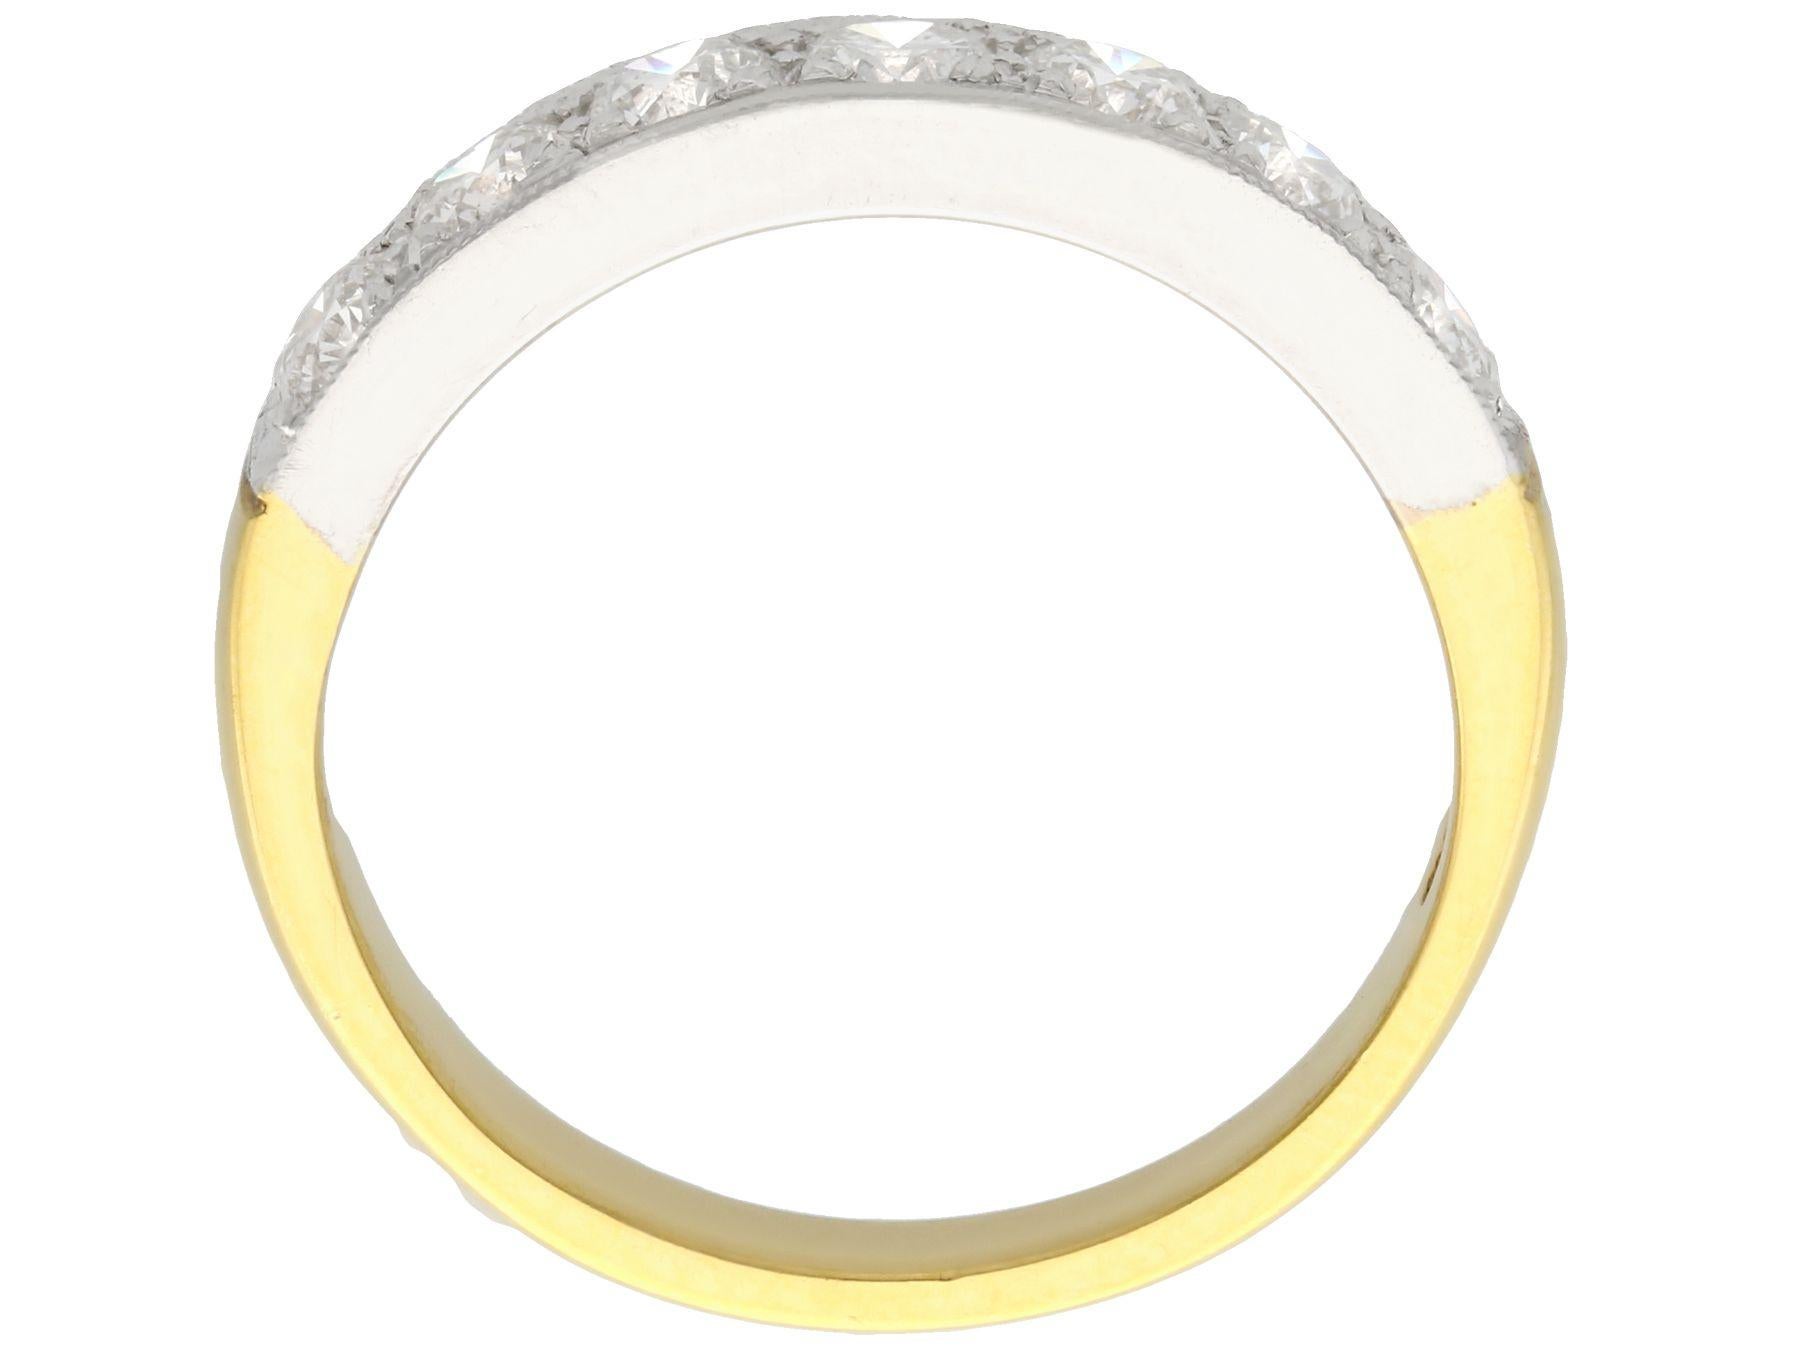 Diamond and 18K Yellow Gold, Platinum Set Half Eternity Ring In Excellent Condition For Sale In Jesmond, Newcastle Upon Tyne